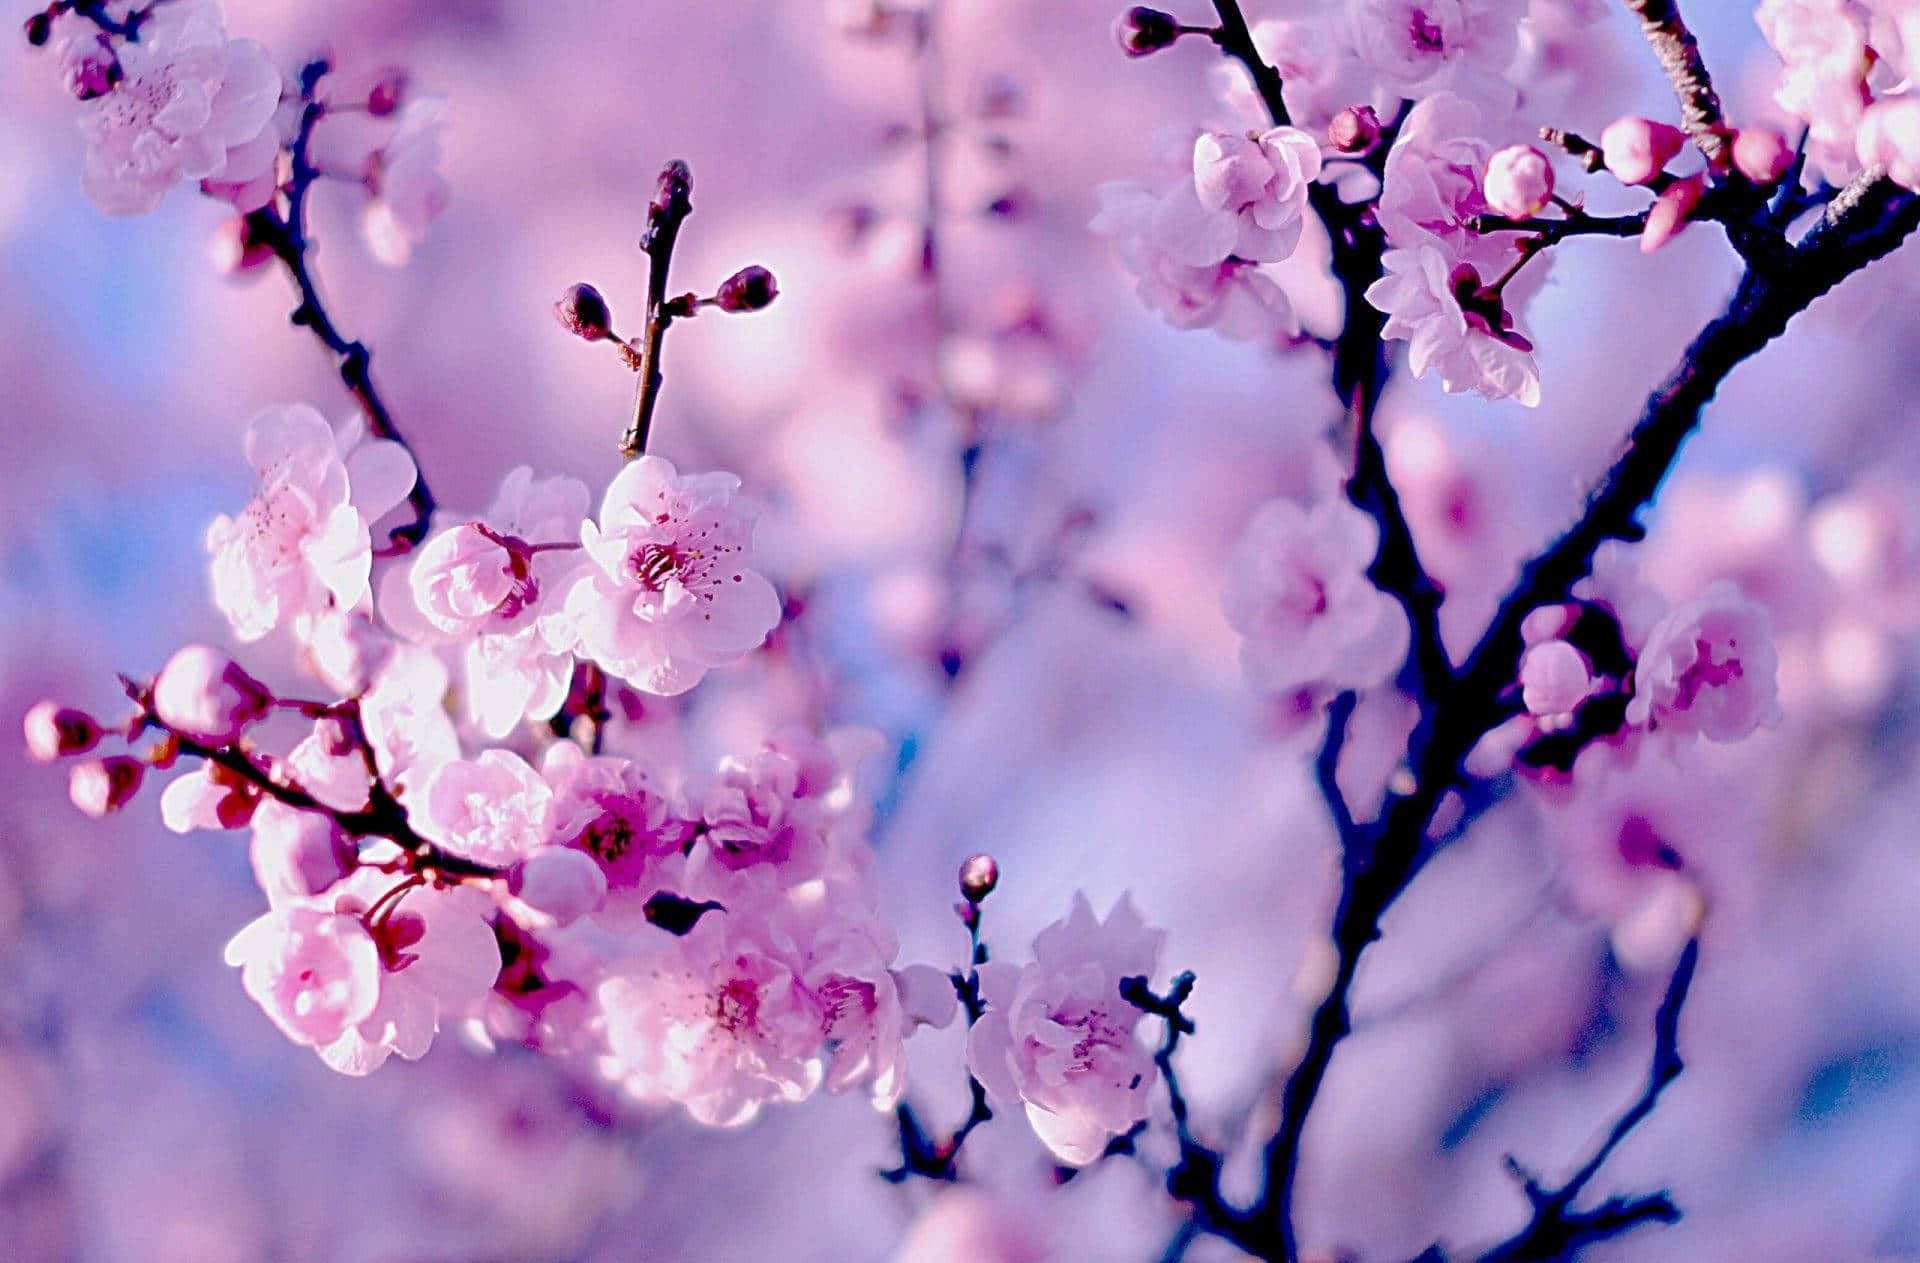 A branch of a cherry tree with pink flowers - Cherry blossom